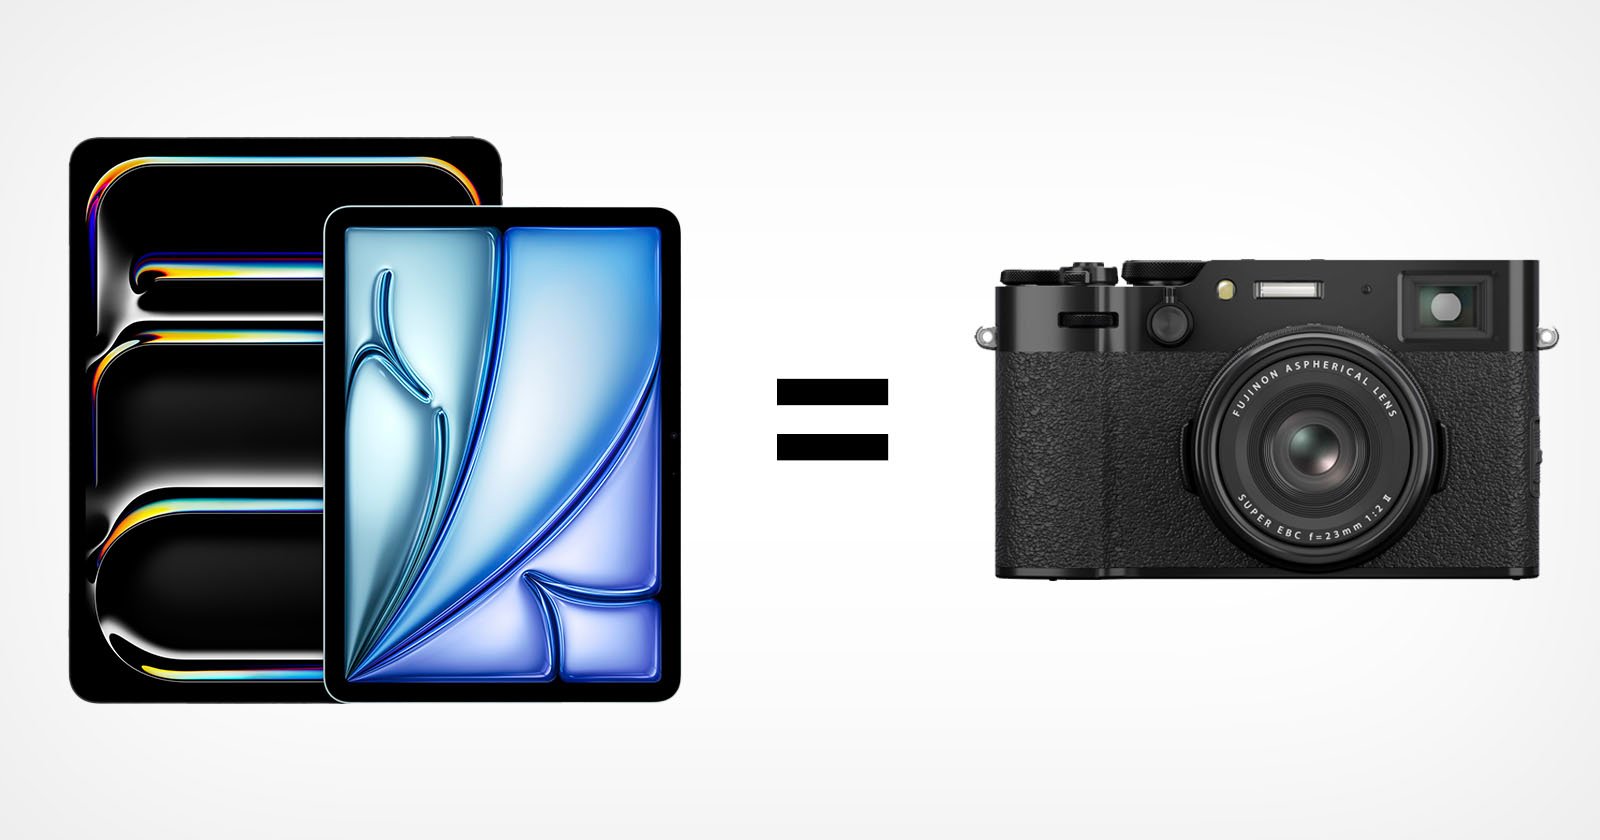 Why Im Glad Apple Didnt Change iPadOS, Using an Analogy Photographers Will Understand